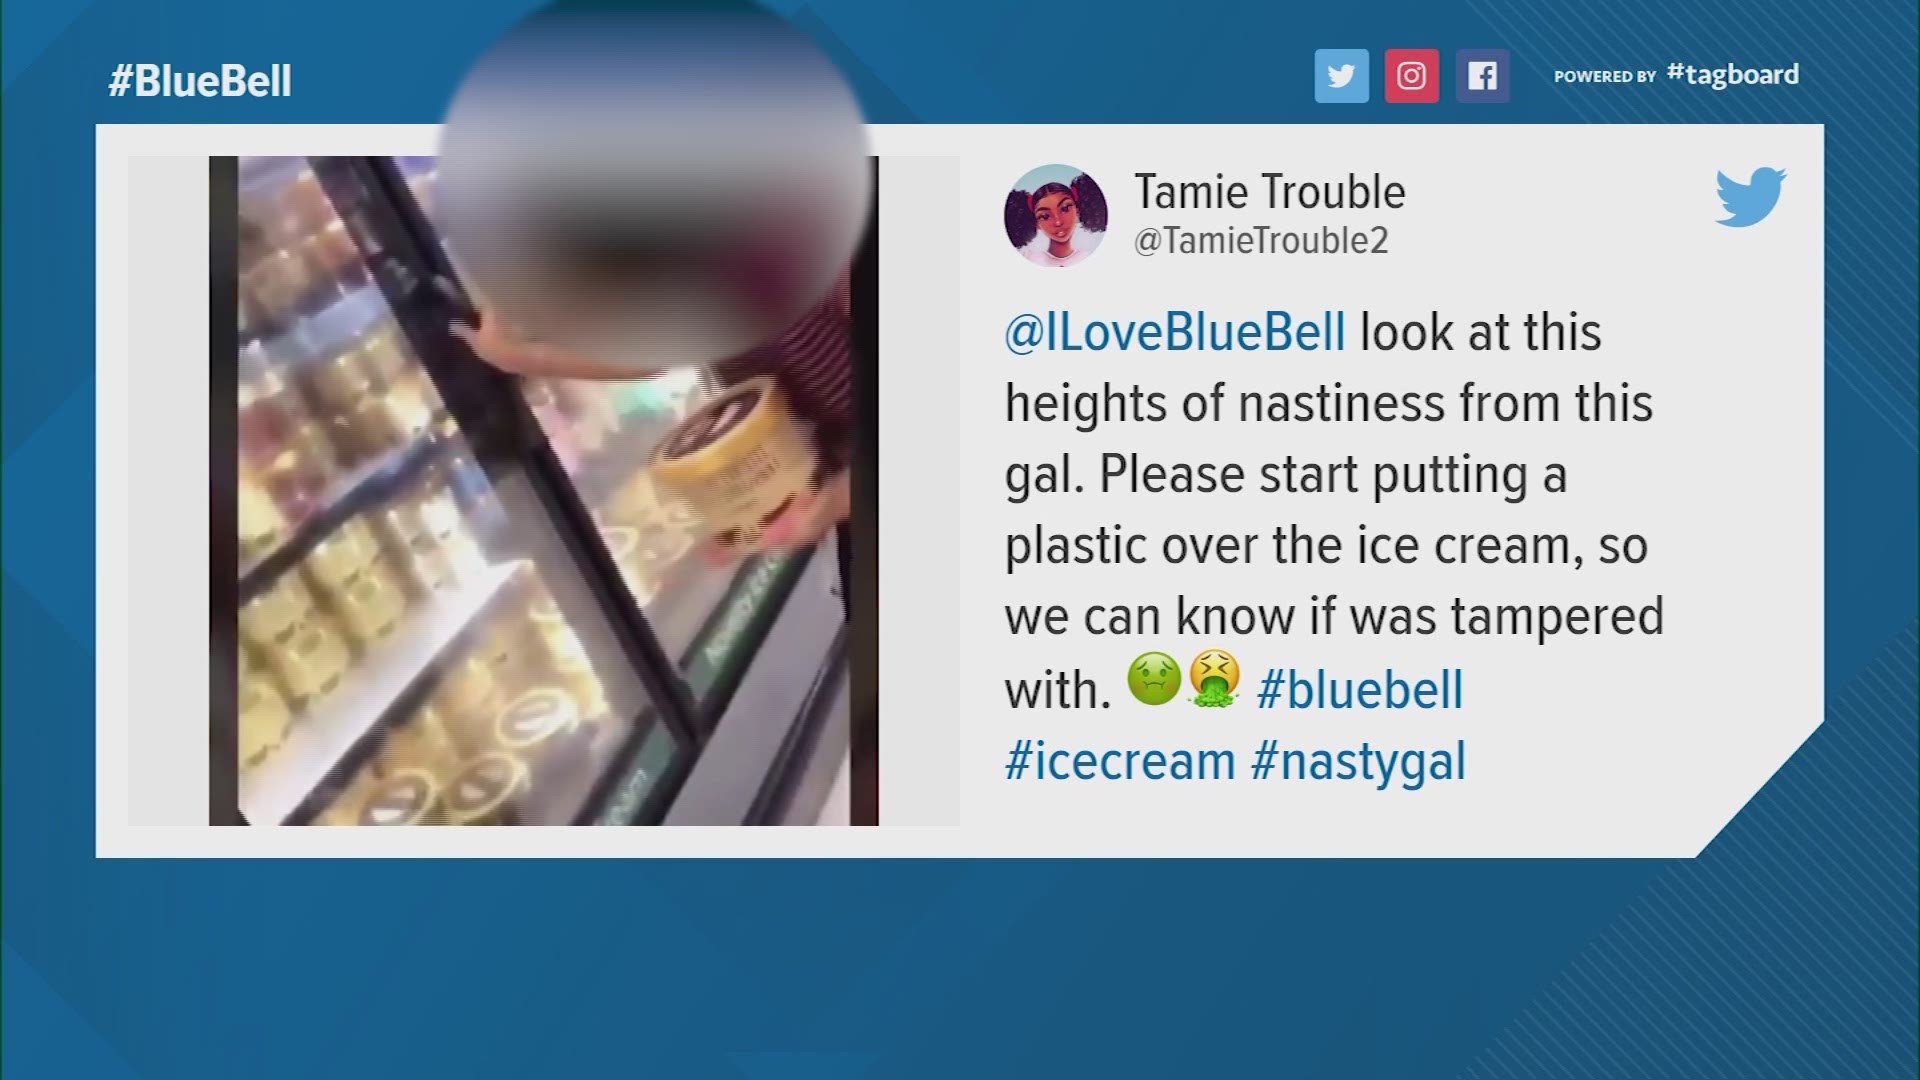 The video shows the woman appear to lick an ice cream product and then put it back in the grocery store freezer.